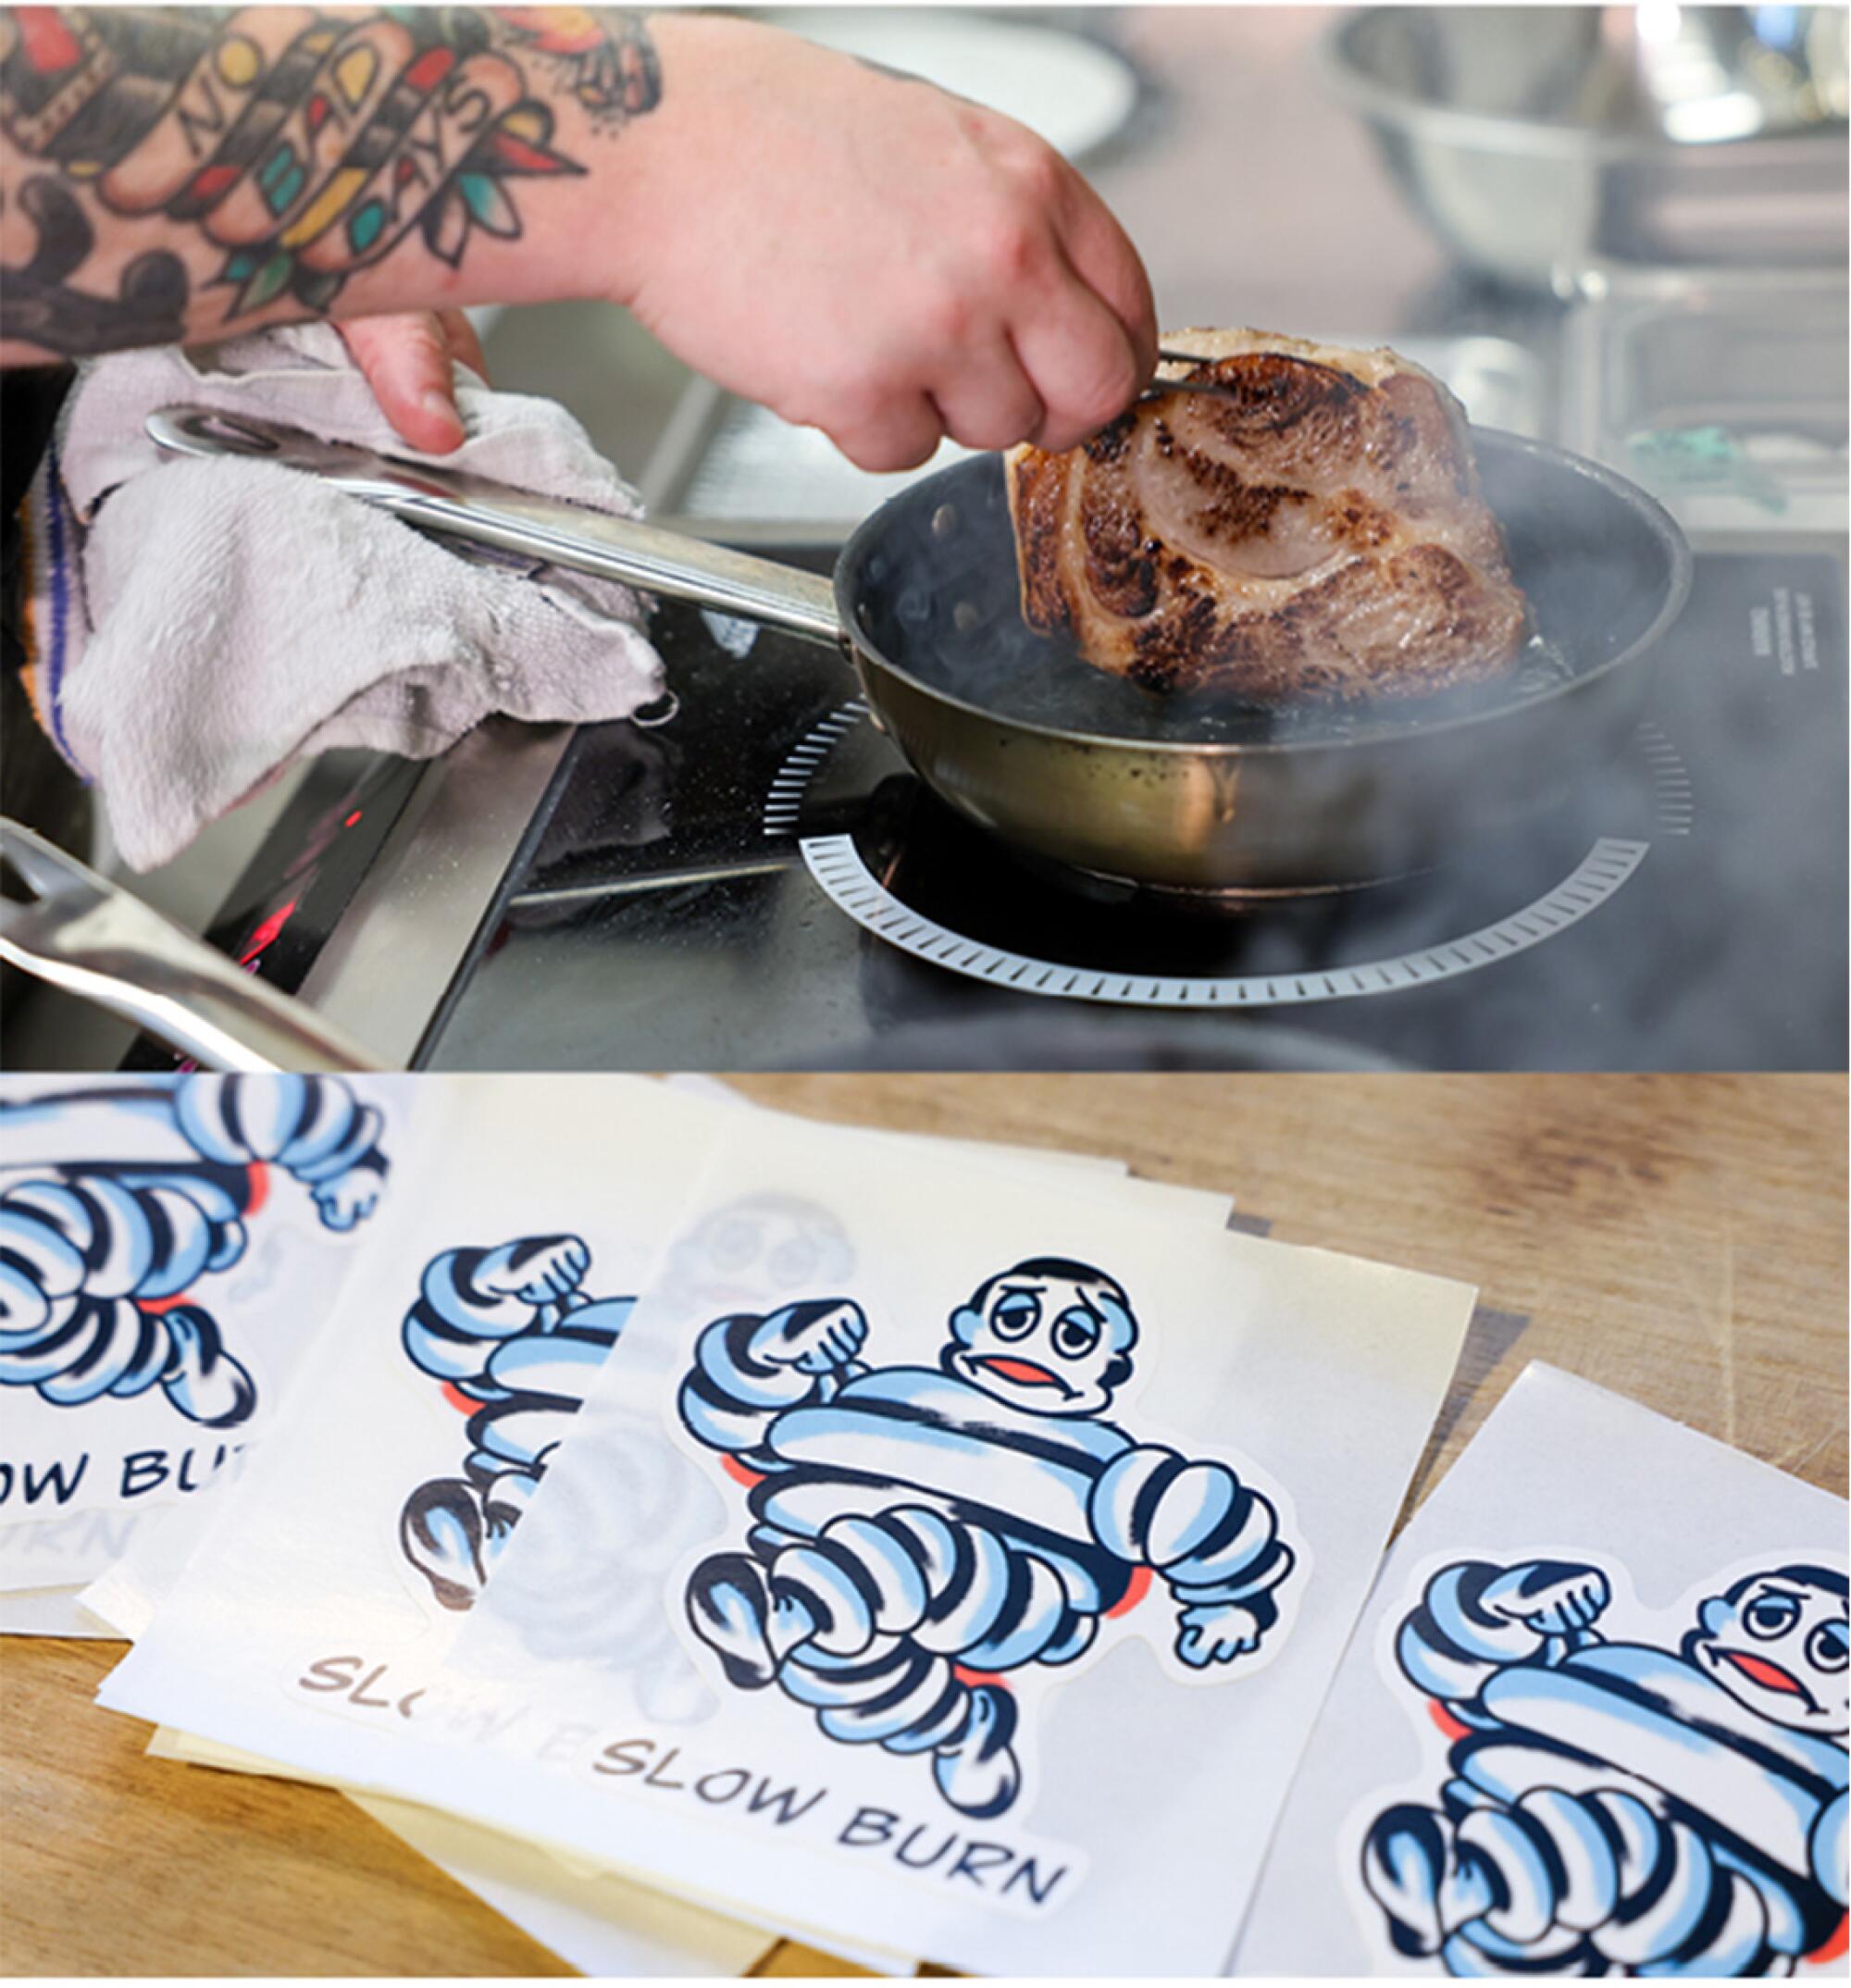 Meat cooking in a skillet, top; Slow Burn stickers show a sick-looking Michelin man-type character, running.